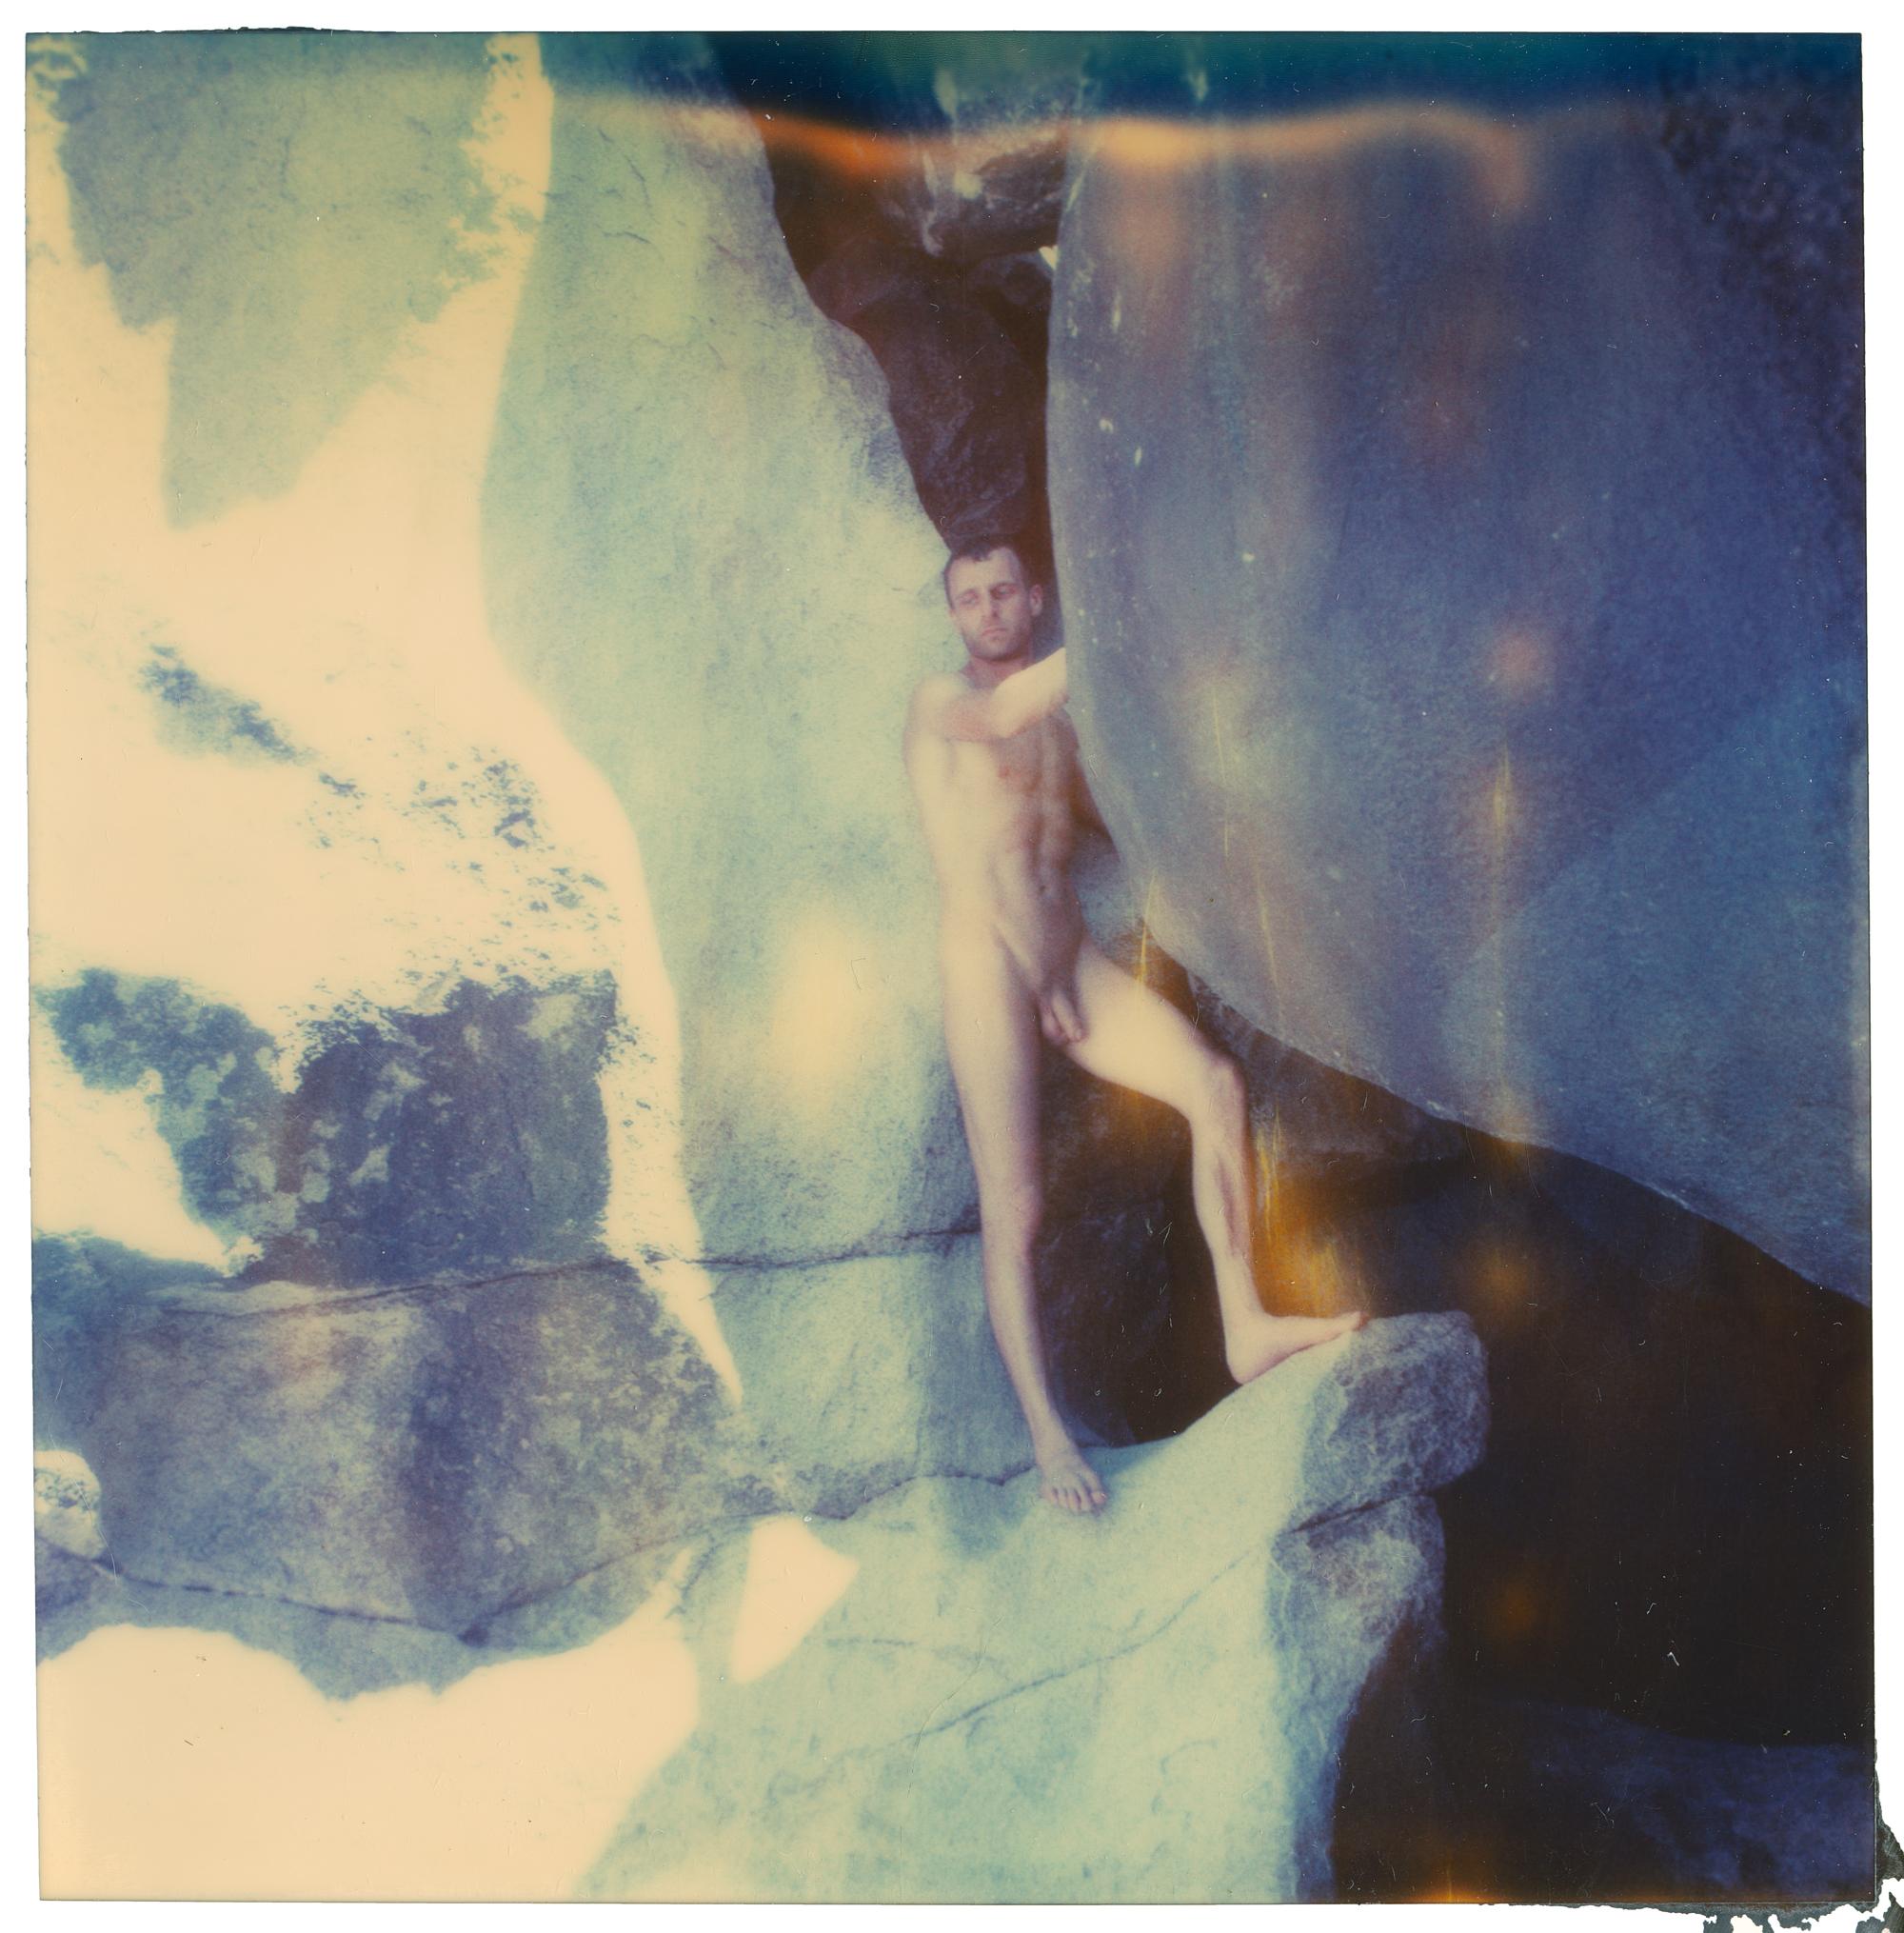 Stefanie Schneider Figurative Photograph - The Cave 02 - Planet of the Apes 11 - 21st Century, Polaroid, Abstract